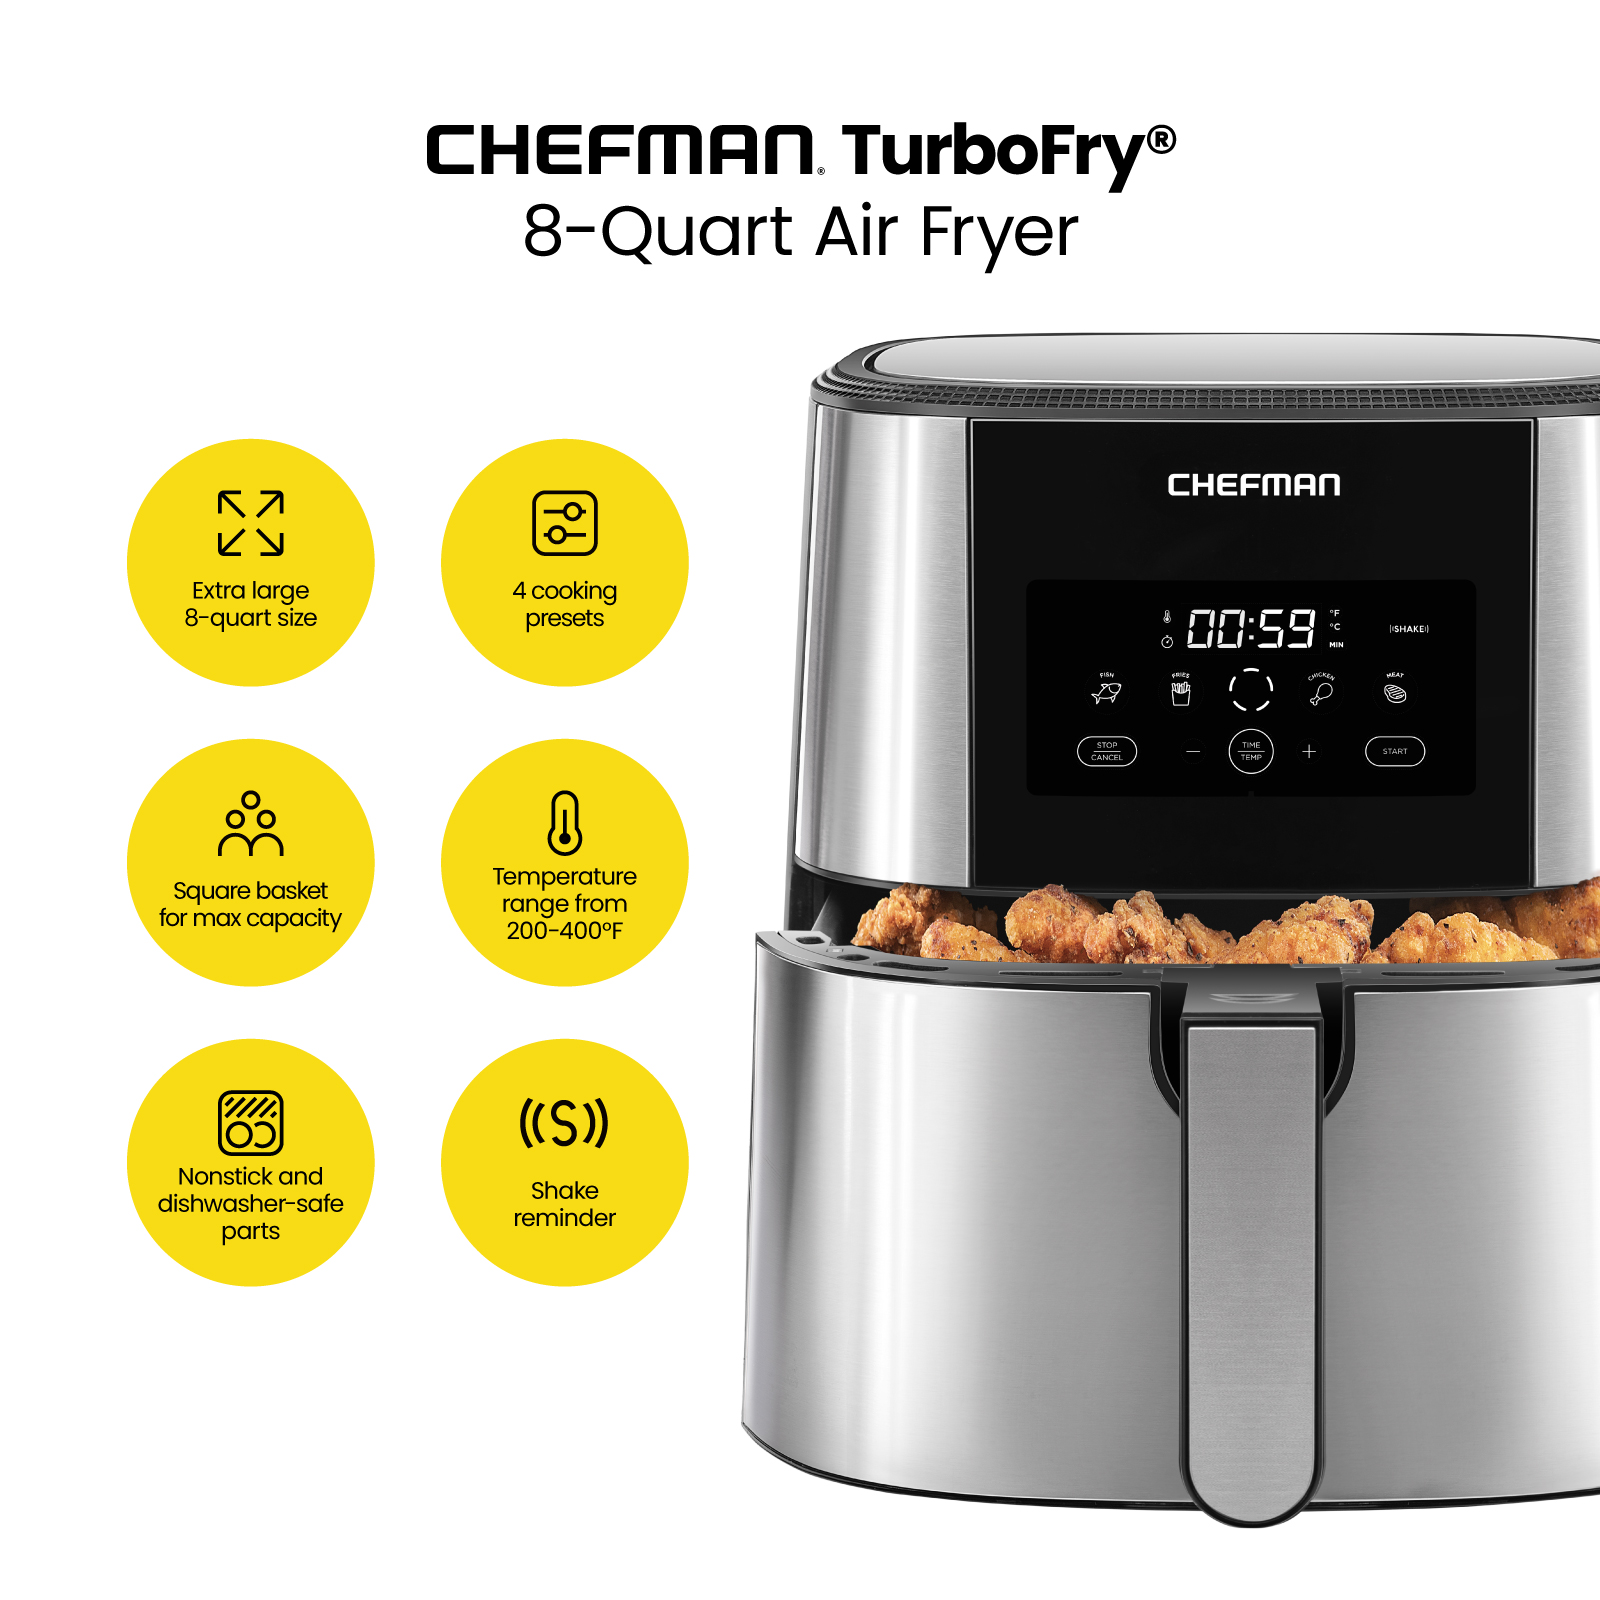 Chefman Turbofry Air Fryer w/ Digital Controls, 8 Qt Capacity - Stainless Steel, New - image 2 of 7